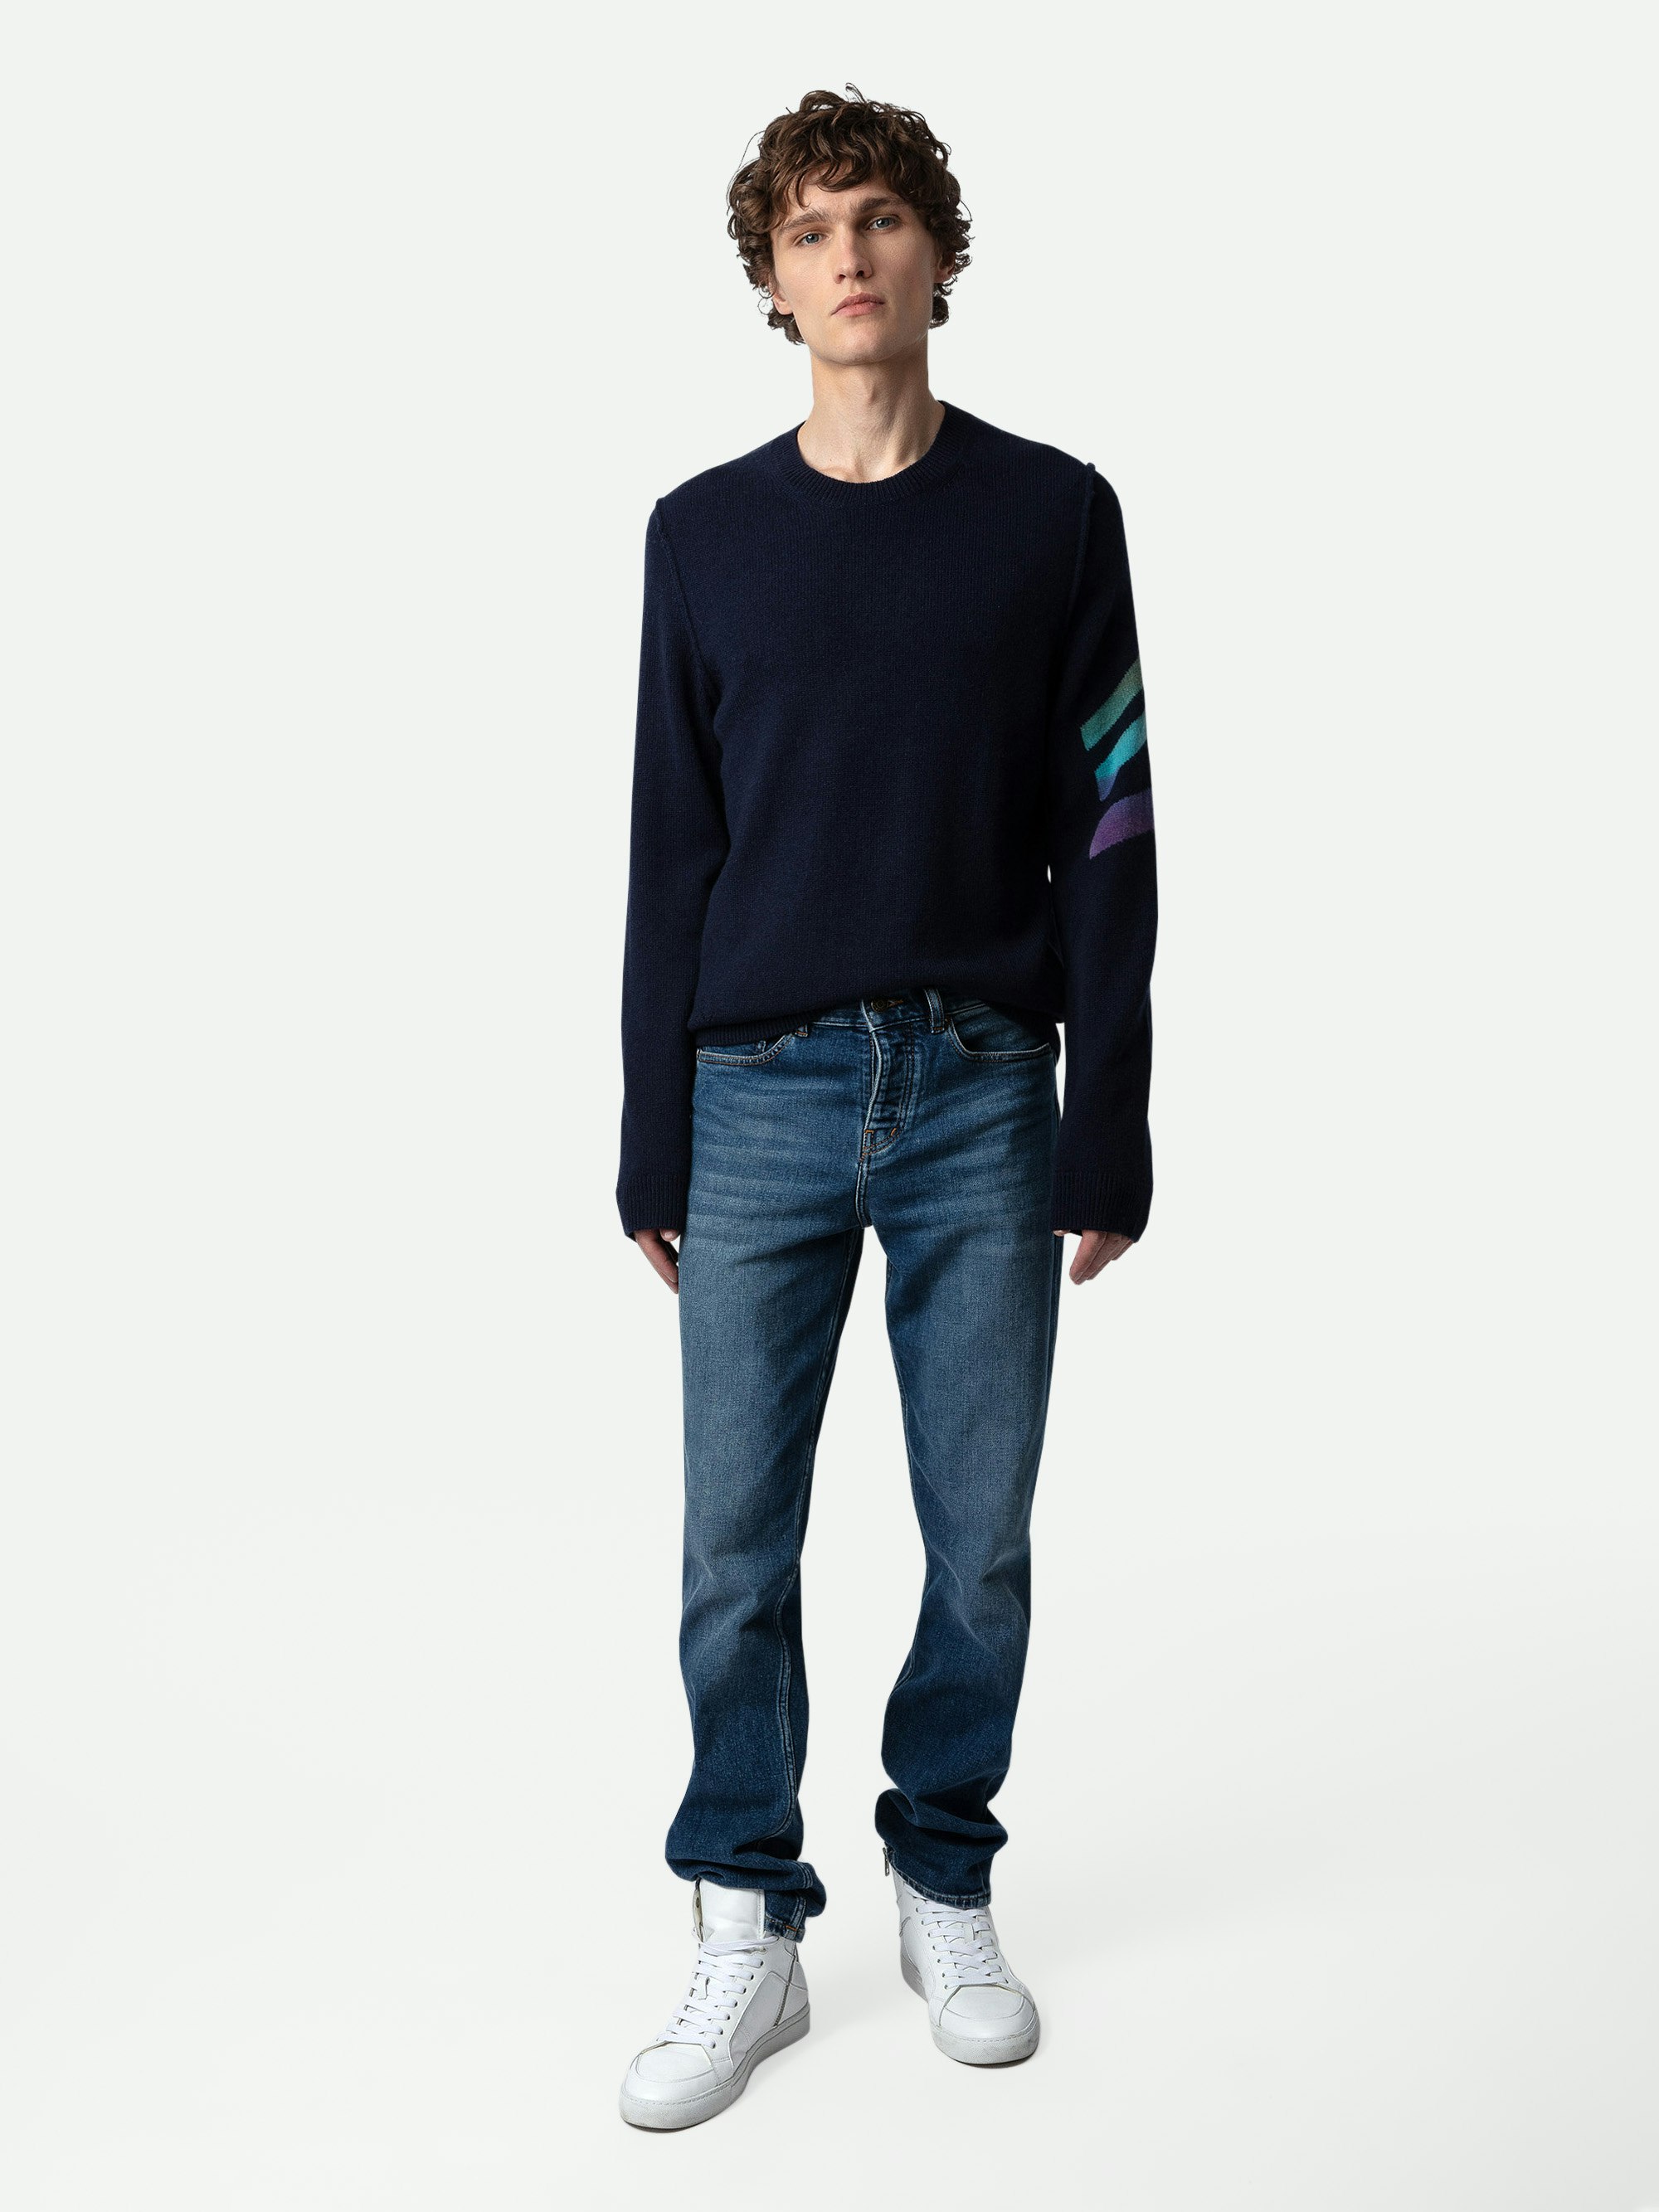 Kennedy Cashmere Sweater - Navy blue cashmere round-neck jumper with tie-dye arrows on the left sleeve.